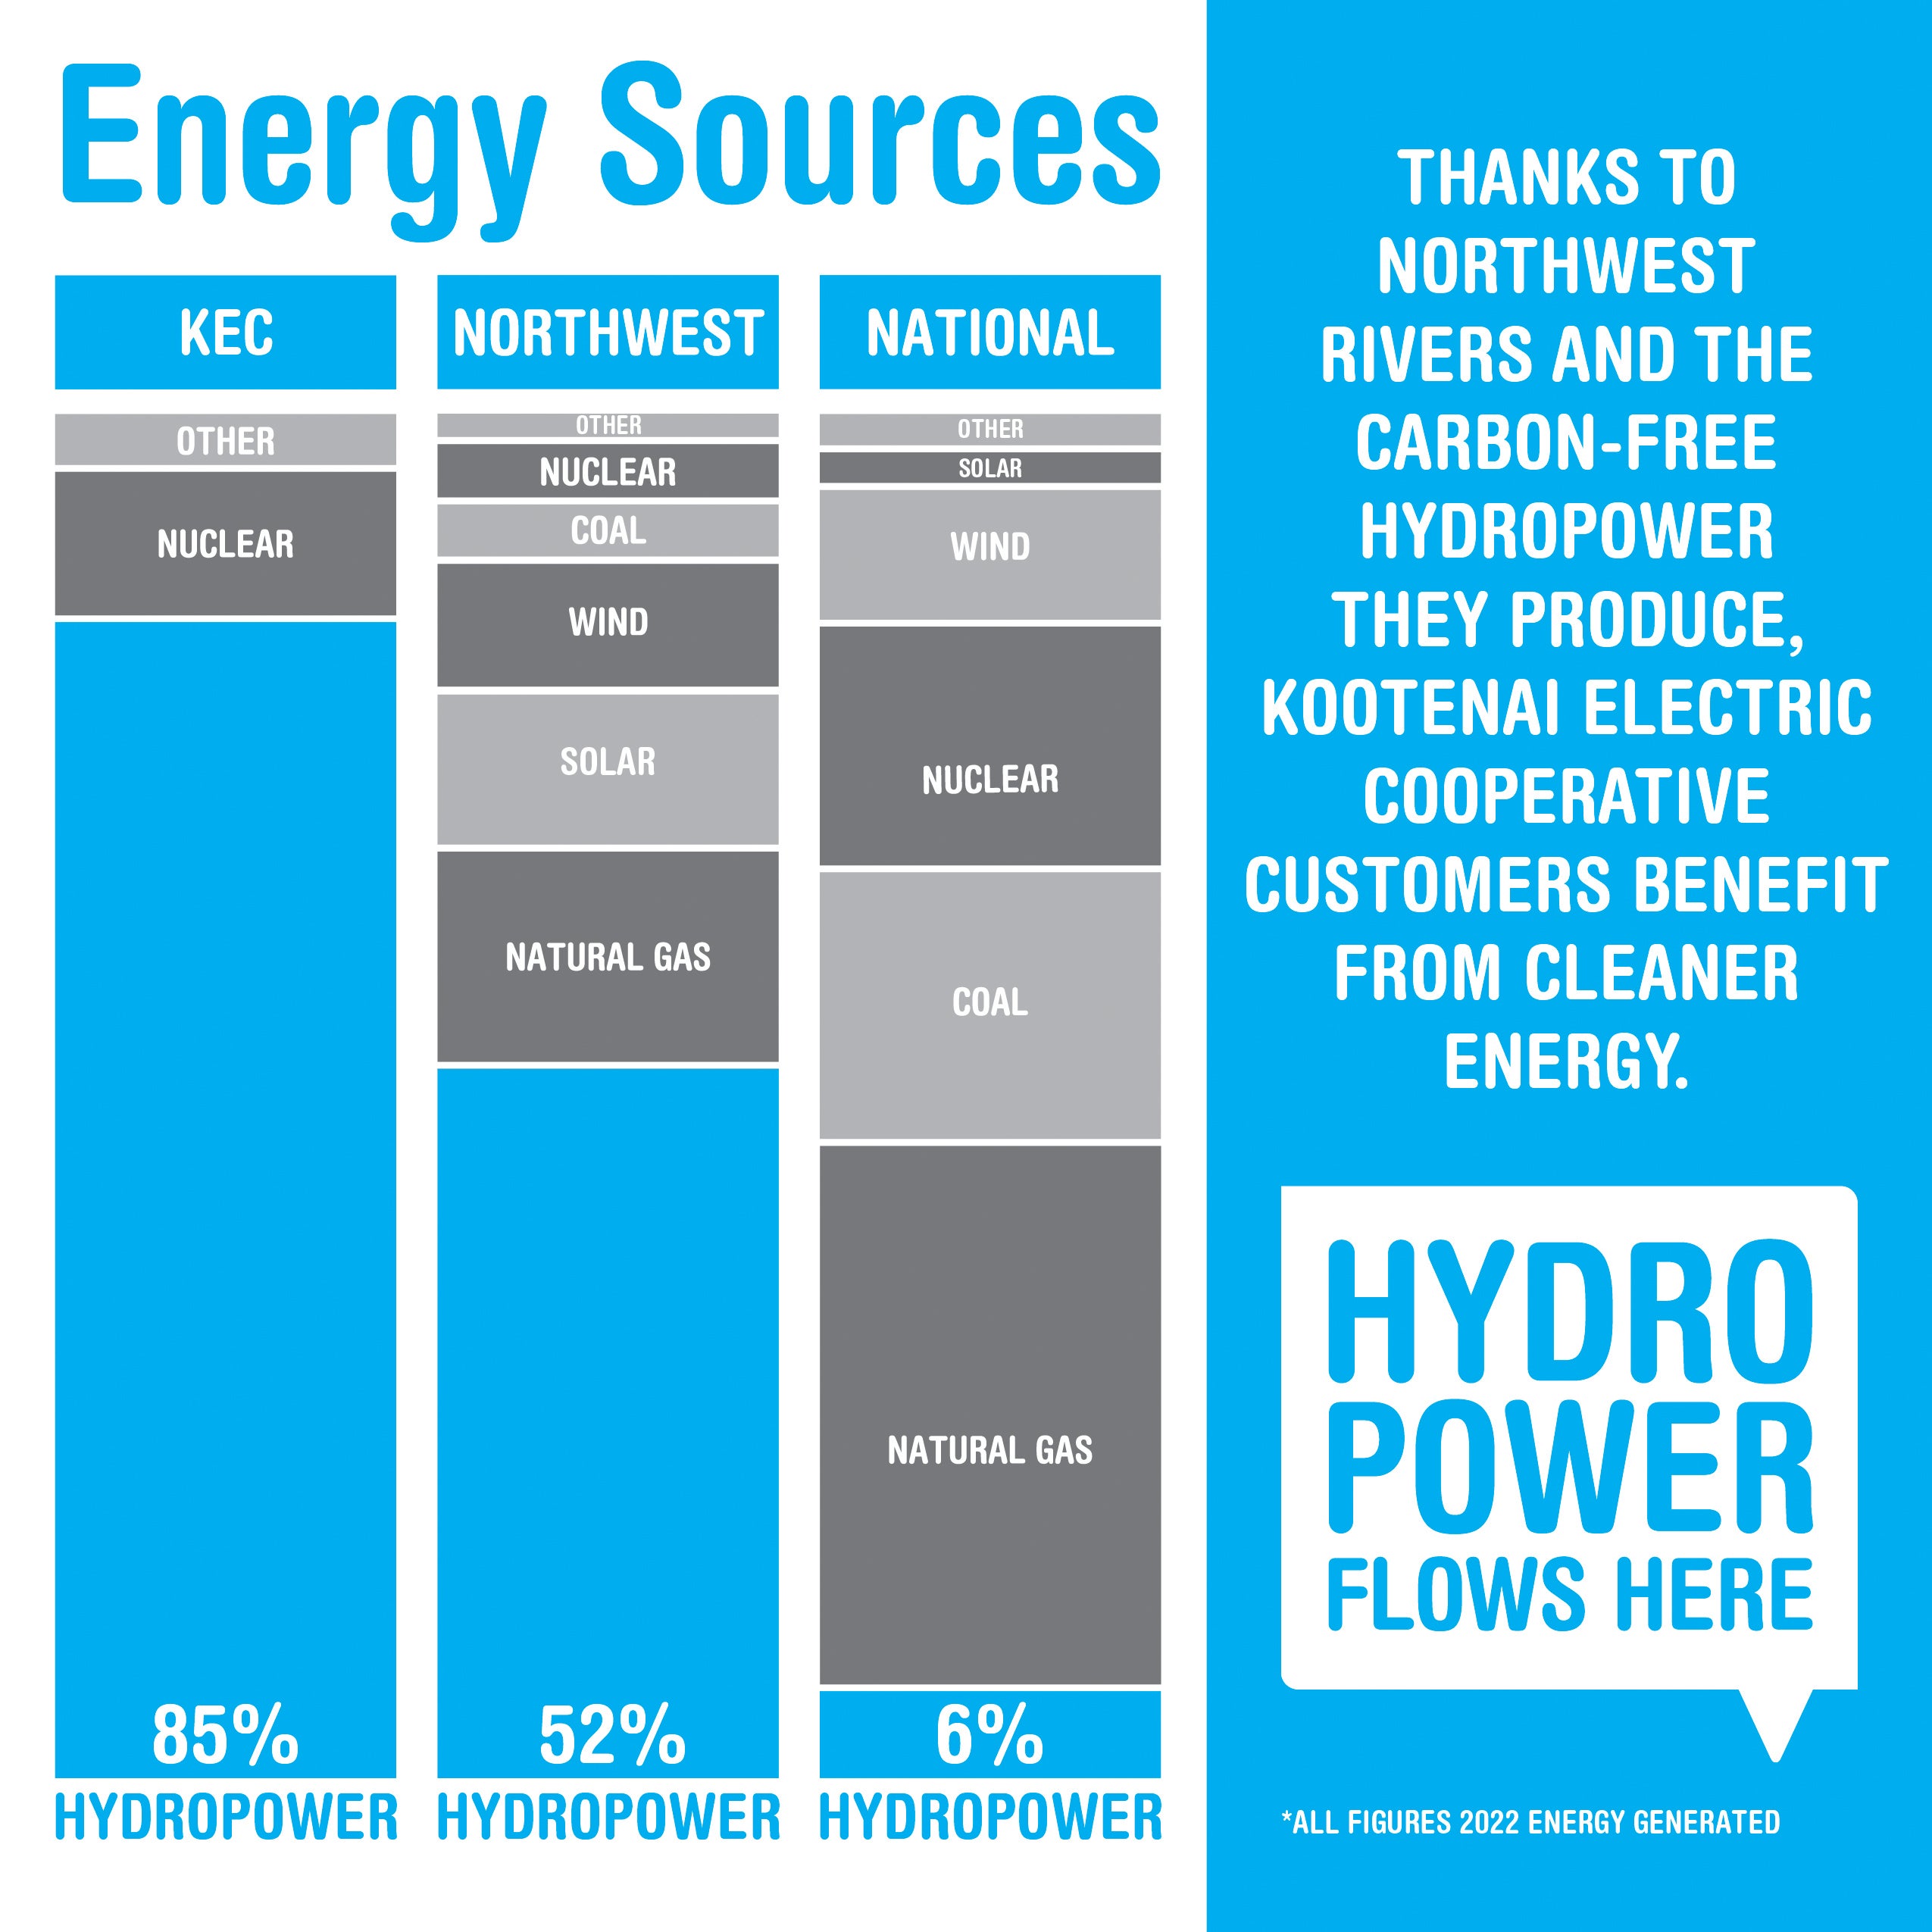 Thanks to Northwest Rivers and the carbon-free hydropower they produce, Kootenai electric cooperative customers benefit from cleaner energy. 85% of KEC energy is from hydropower. 52% of Northwest energy is from hydropower. 6% of national energy is from hydropower. All figures 2022 energy generated. 